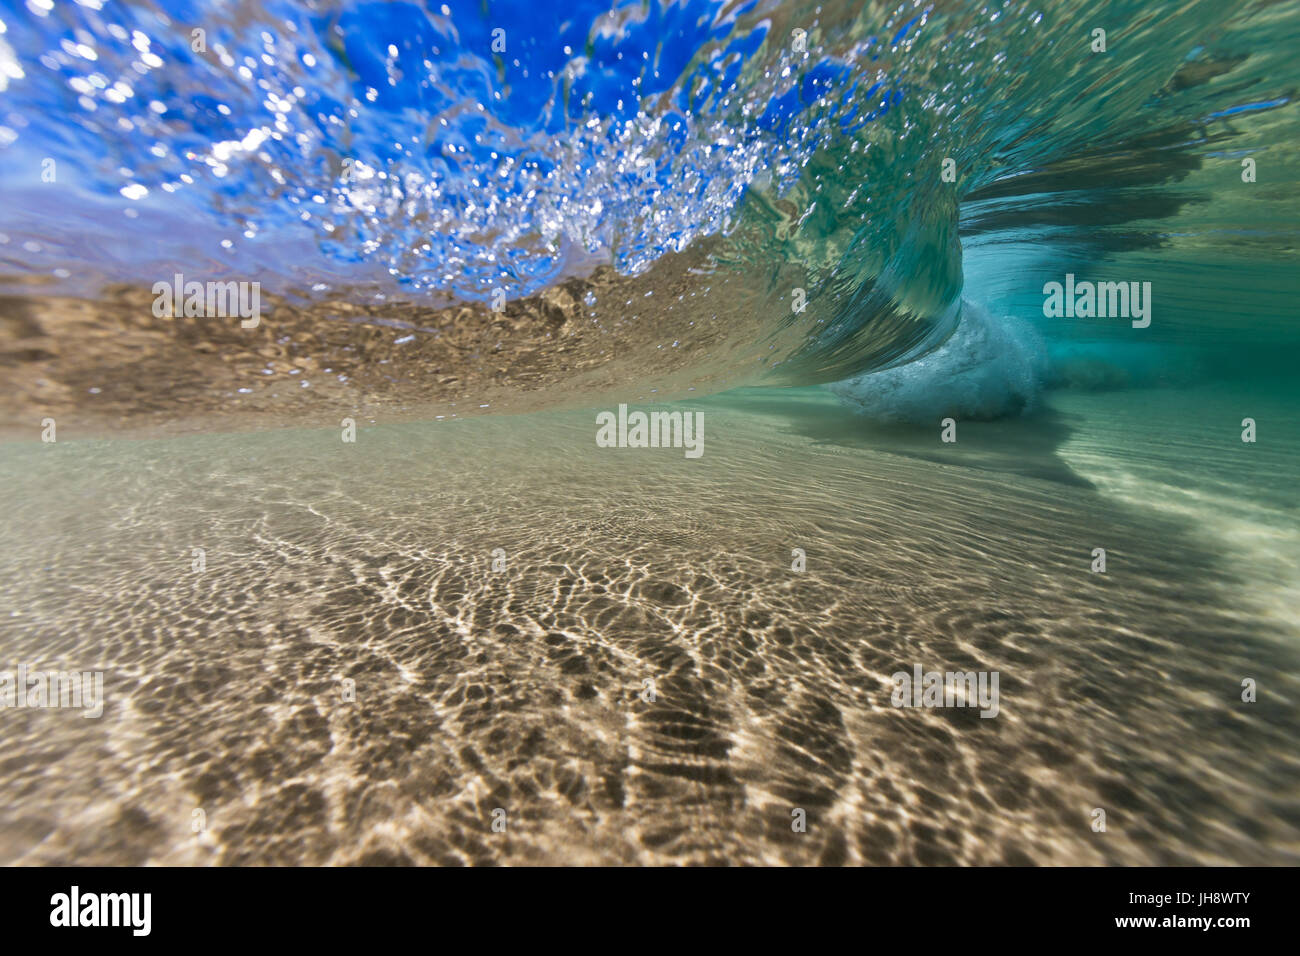 An underwater shot of beneath a wave breaking in crystal clear water over a sand bottom. Stock Photo